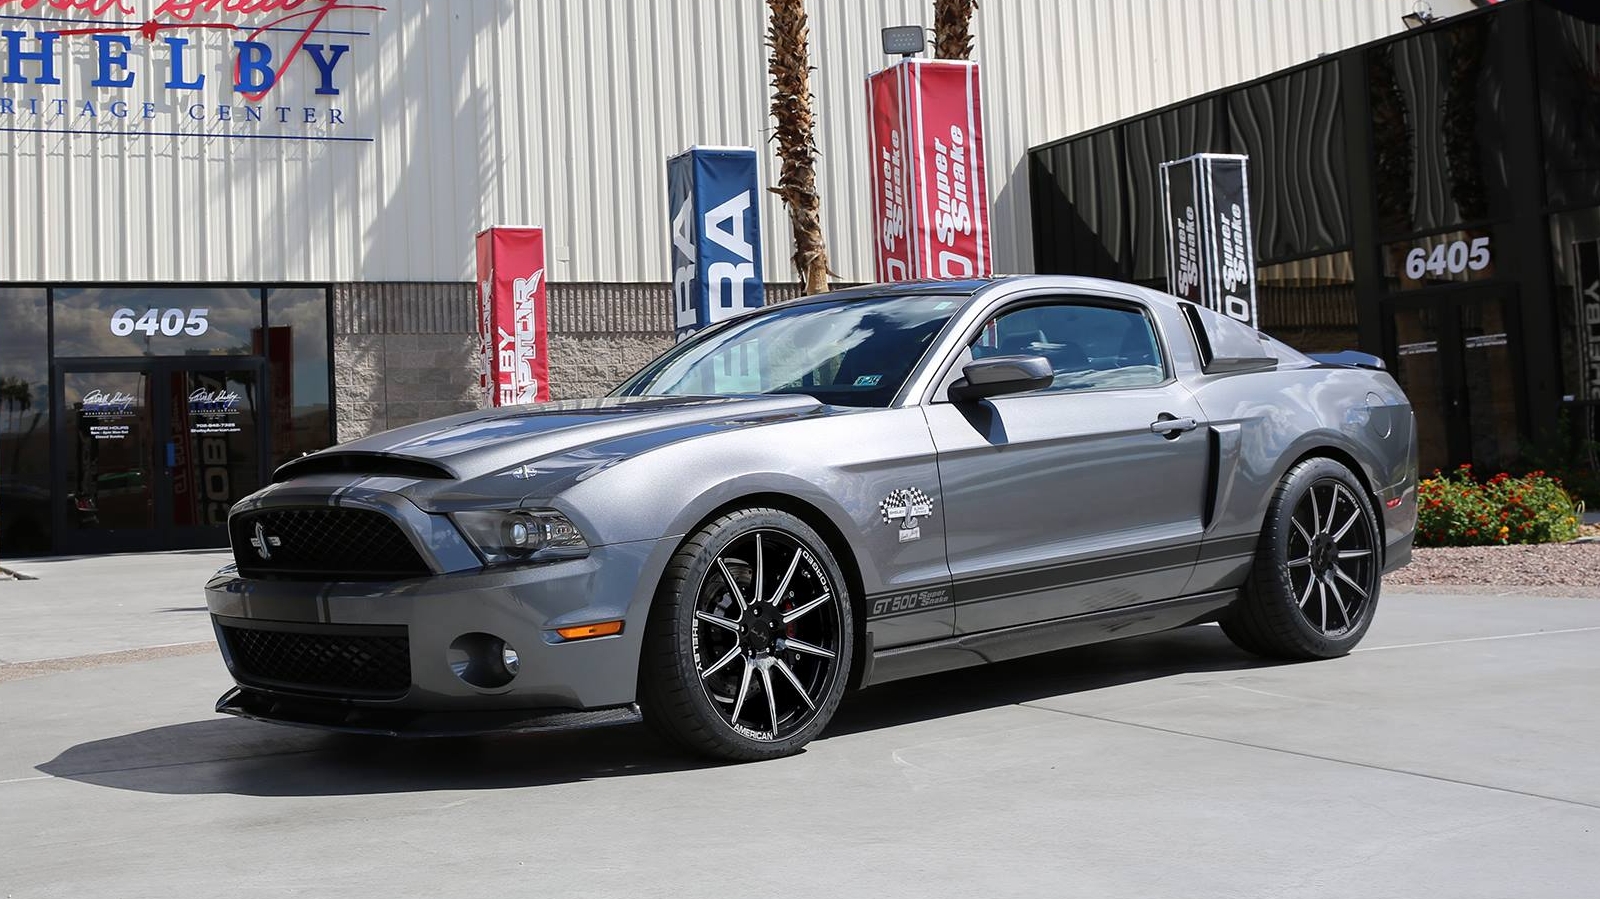 Ford Shelby Mustang GT500 Signature Edition Super Snake